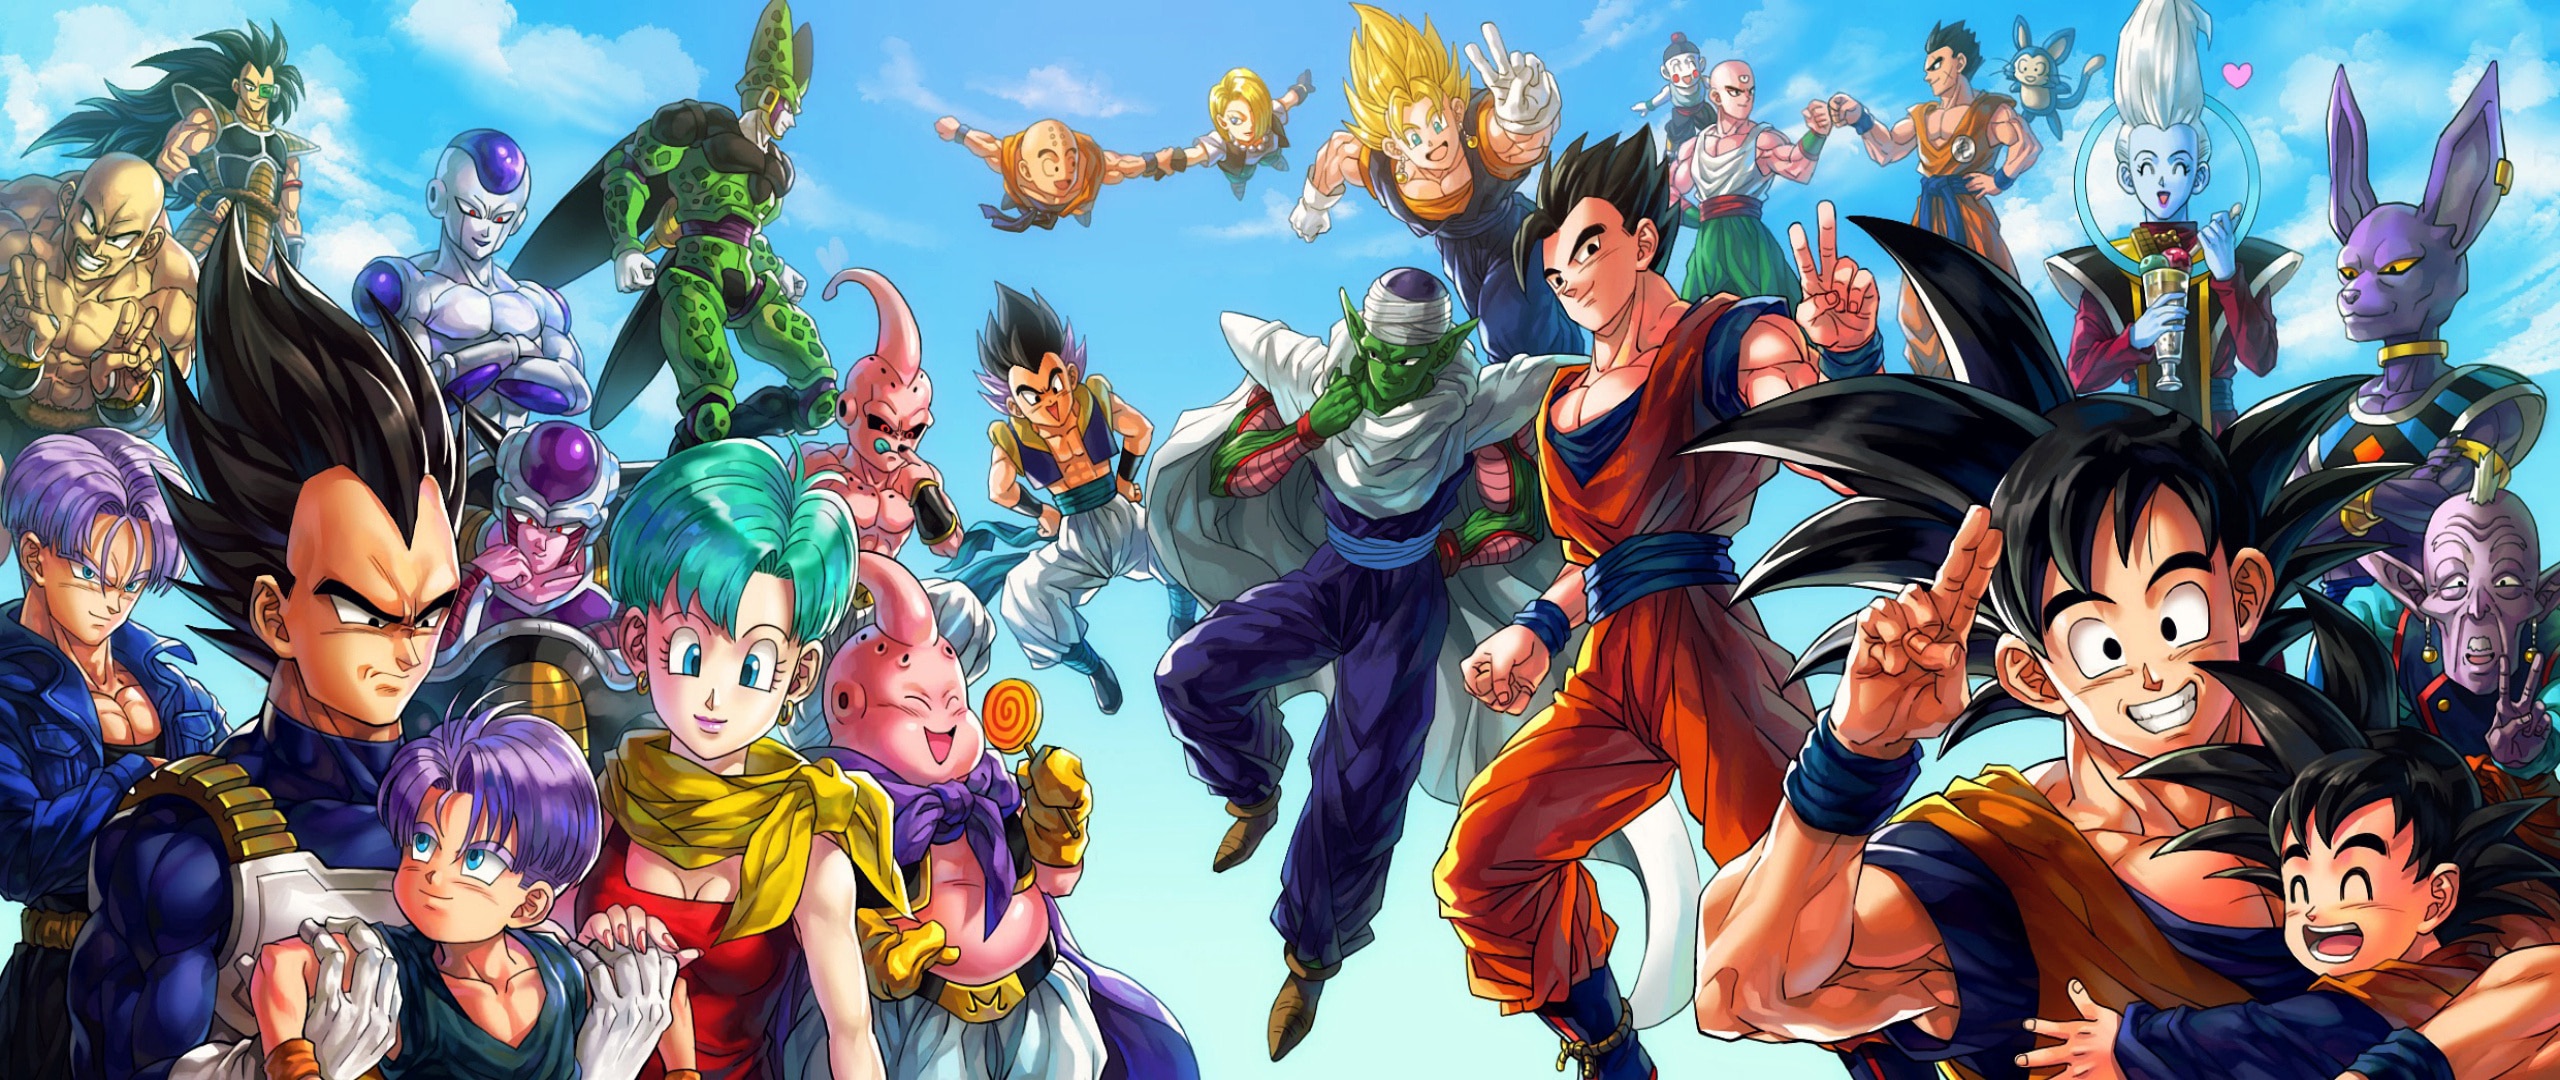 Bra & Vegetto: How Dragon Ball Multiverse Neutered Its BEST Characters